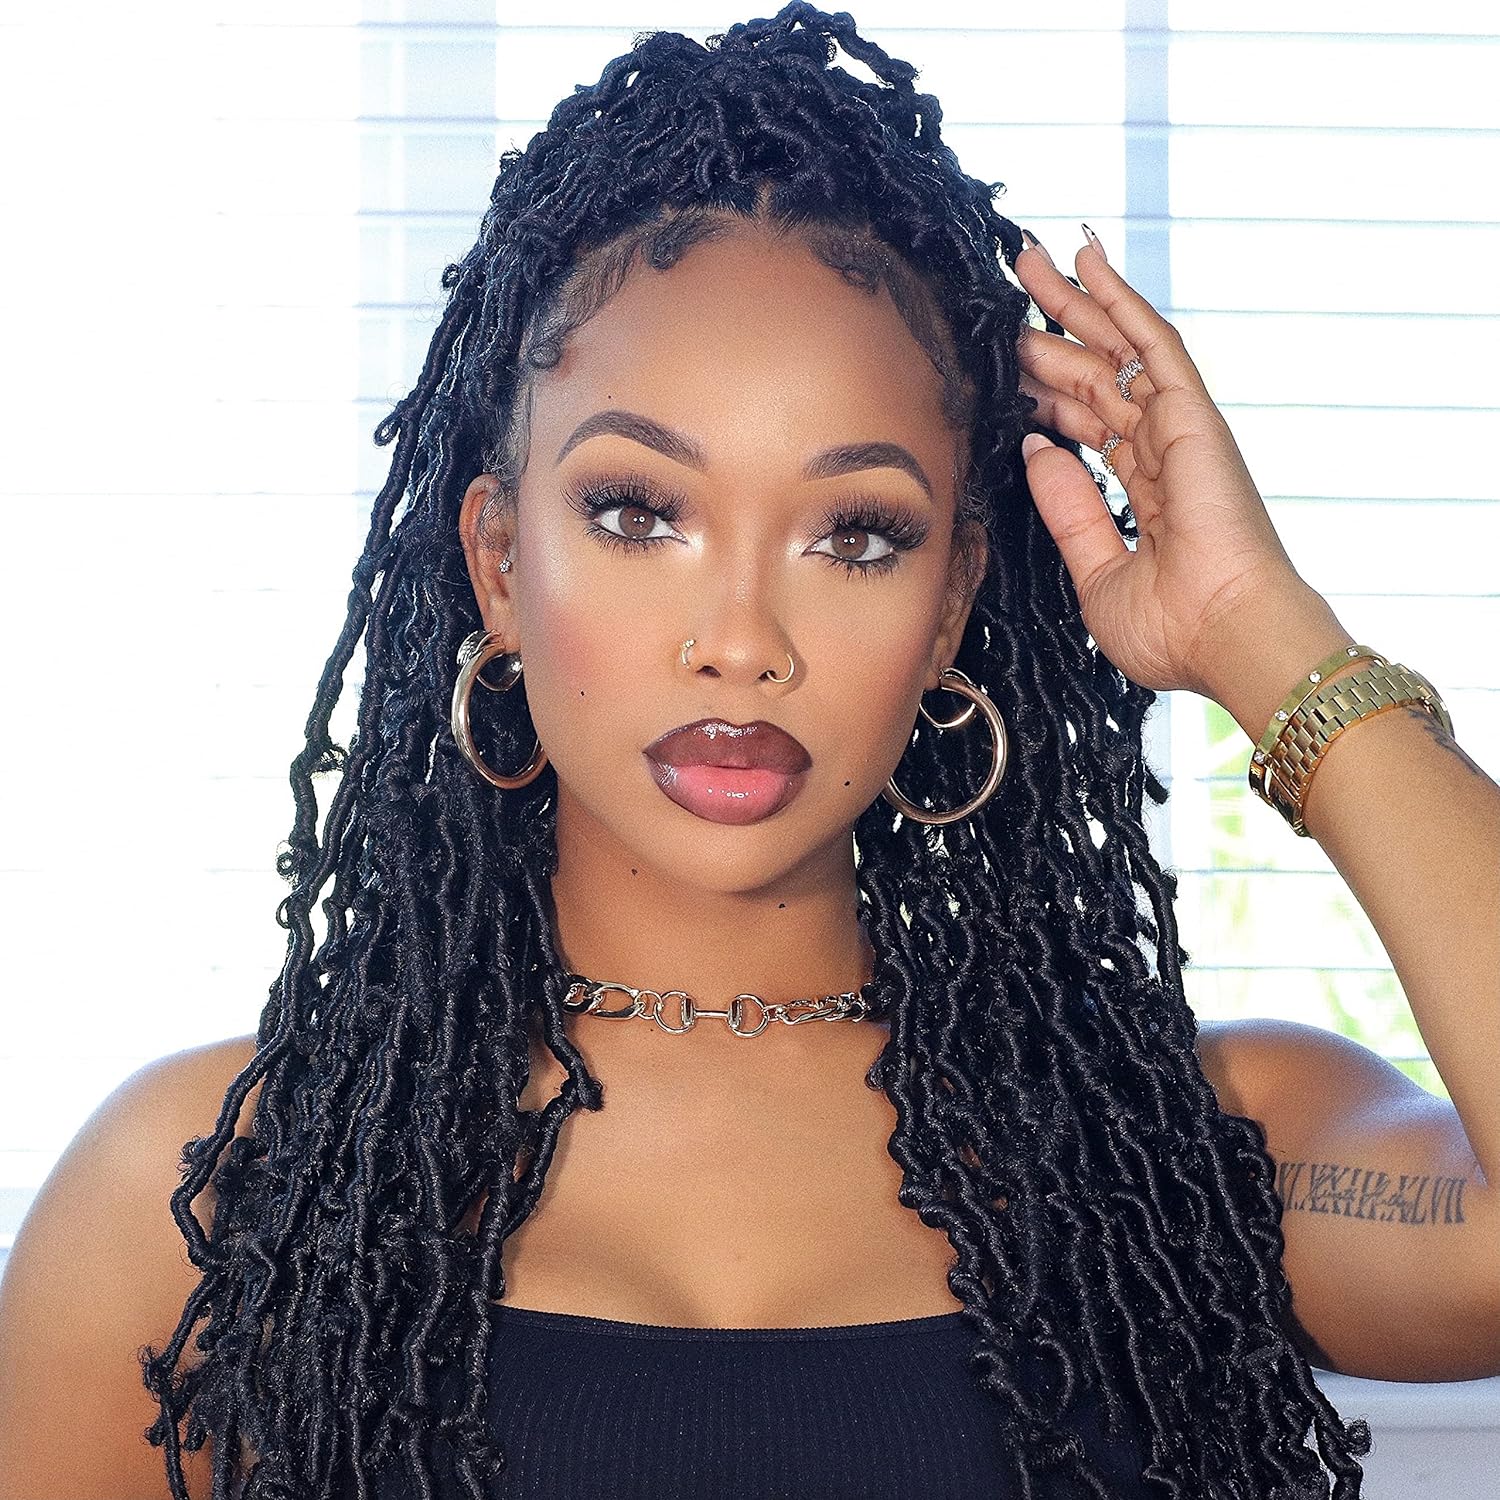 FAST SHIPPING 3-5 DAY DBL | Toyotress Butterfly Locs Crochet Hair - 8 inch 7Pcs Natural Black Pre-twisted Distressed Crochet Braids, Short Bob Faux Locs Pre-looped Synthetic Braiding Hair Extensions